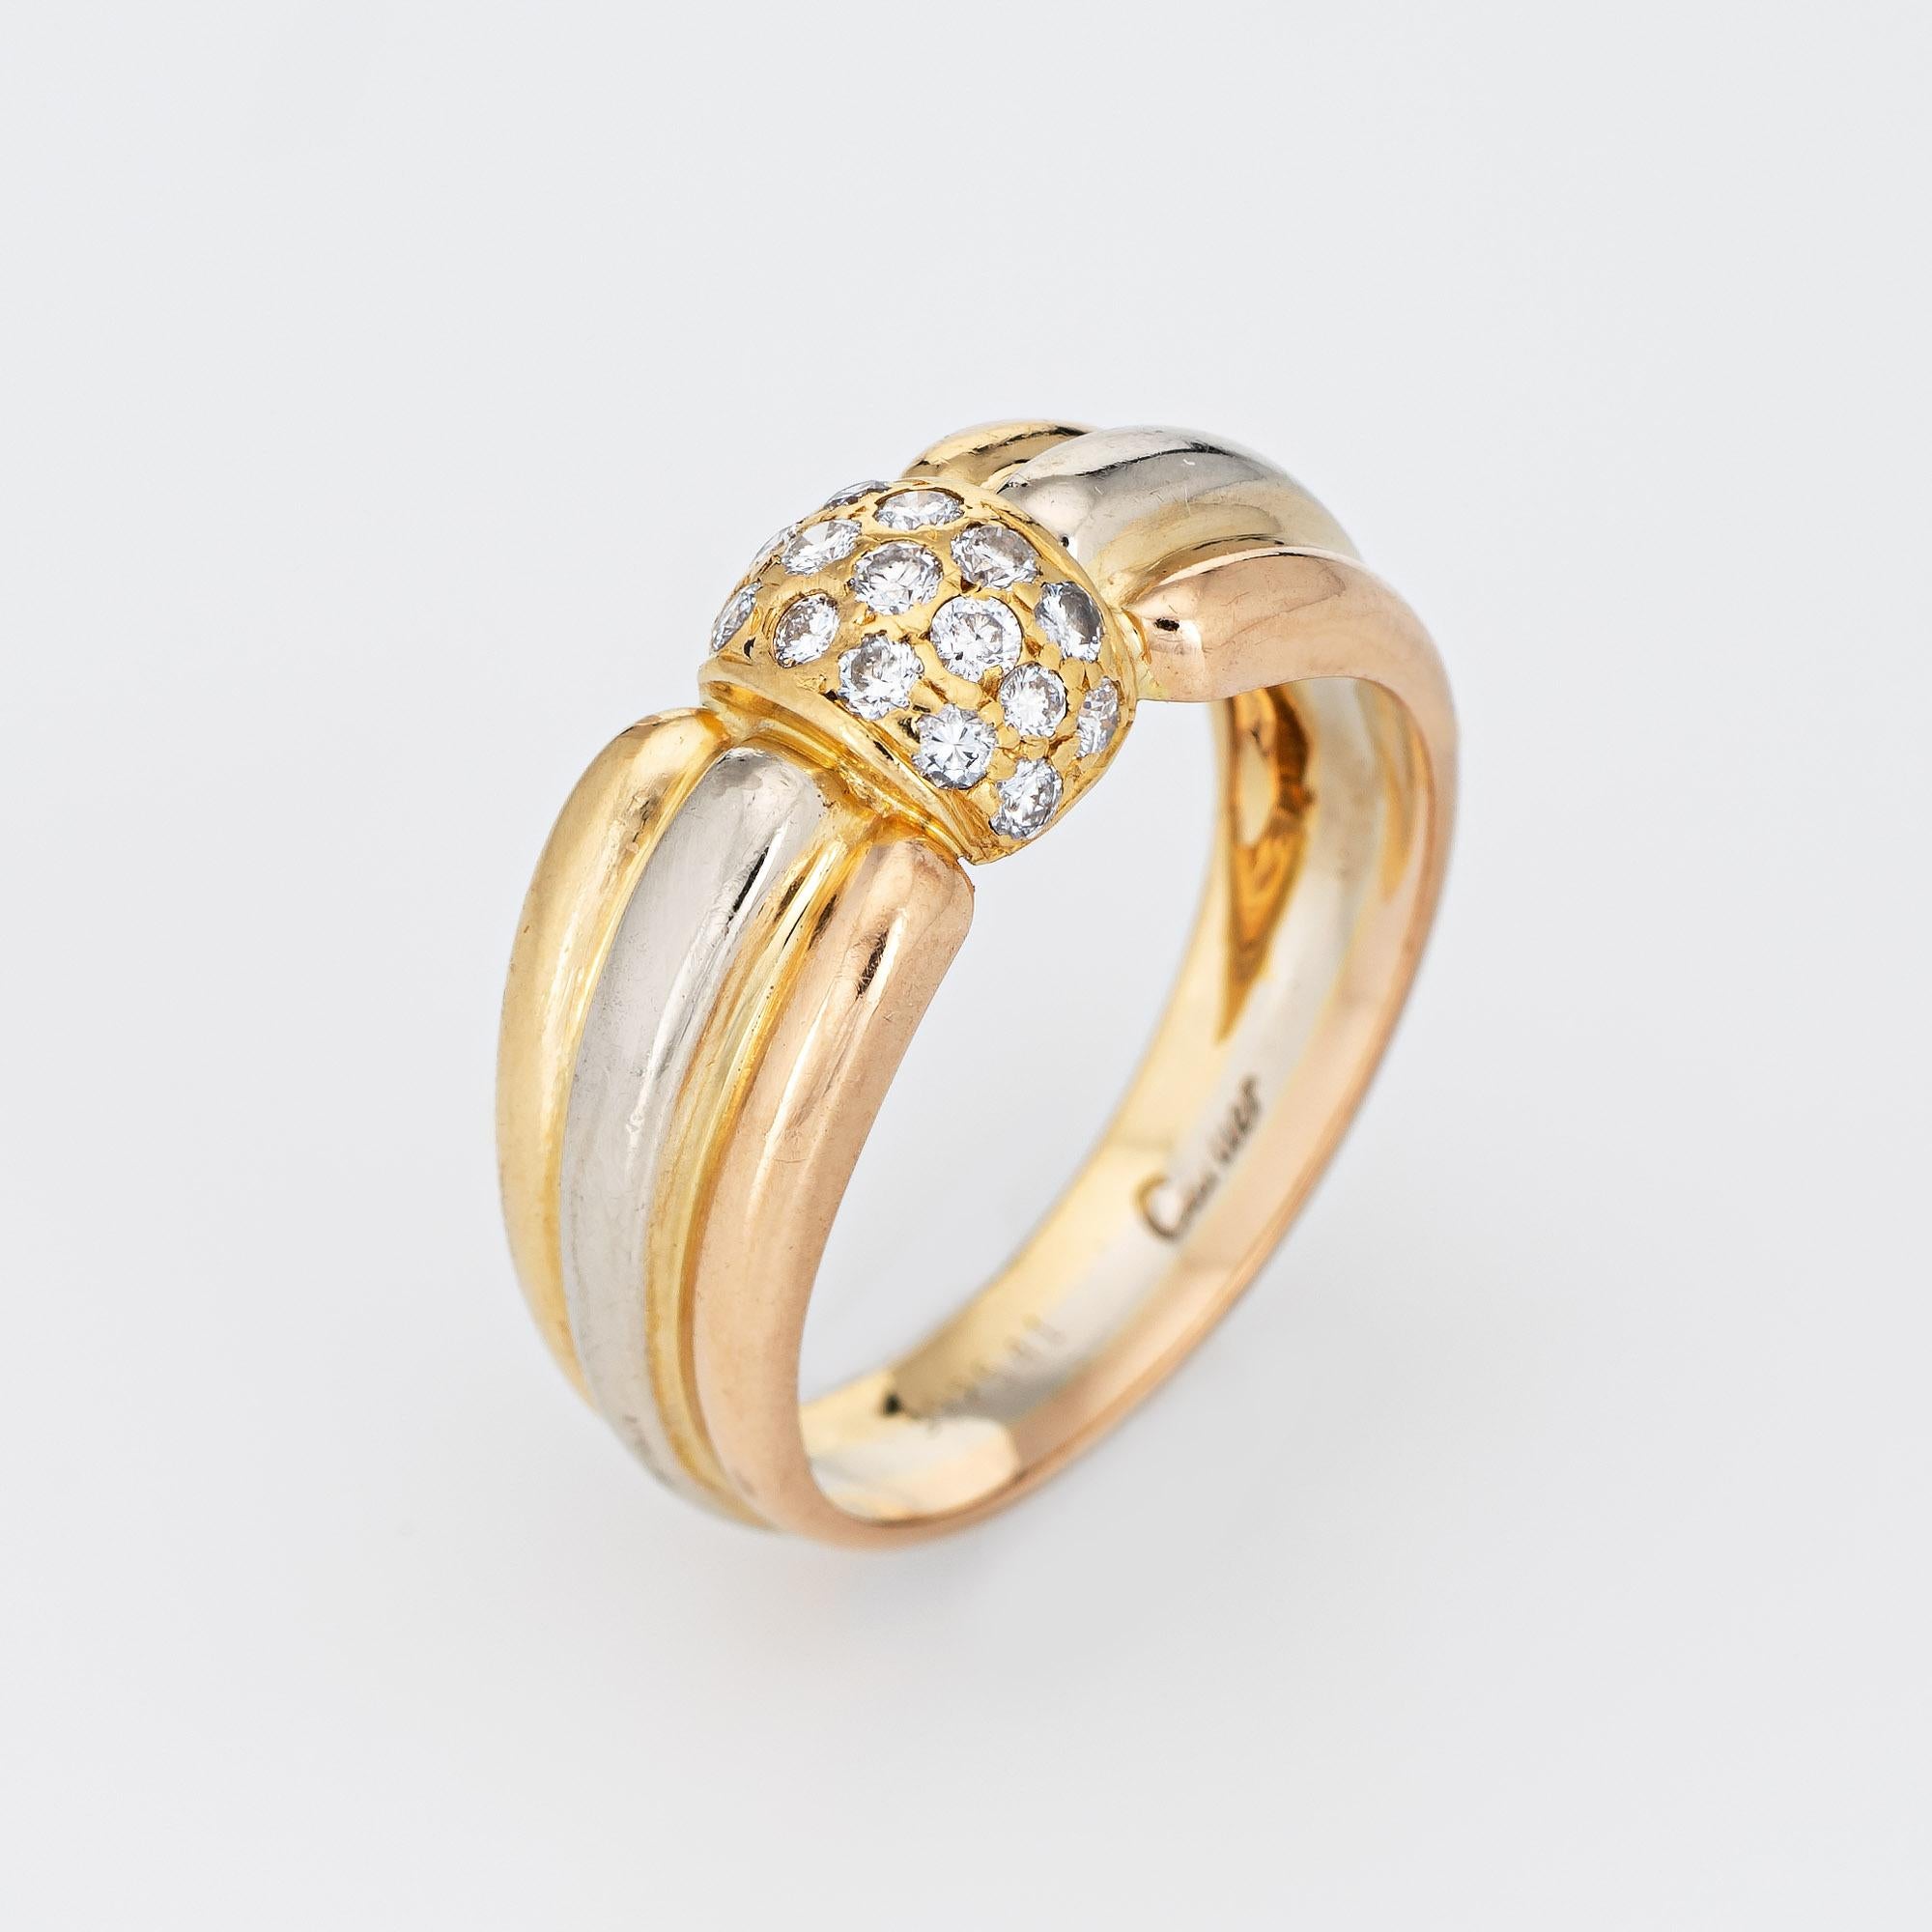 Vintage Cartier diamond ring crafted in 18 karat yellow, rose & white gold (circa 1980s to 1990s).  

17 round brilliant cut diamonds total an estimated 0.34 carats (estimated at G-H color and VS1-2 clarity).

The out of production Cartier ring